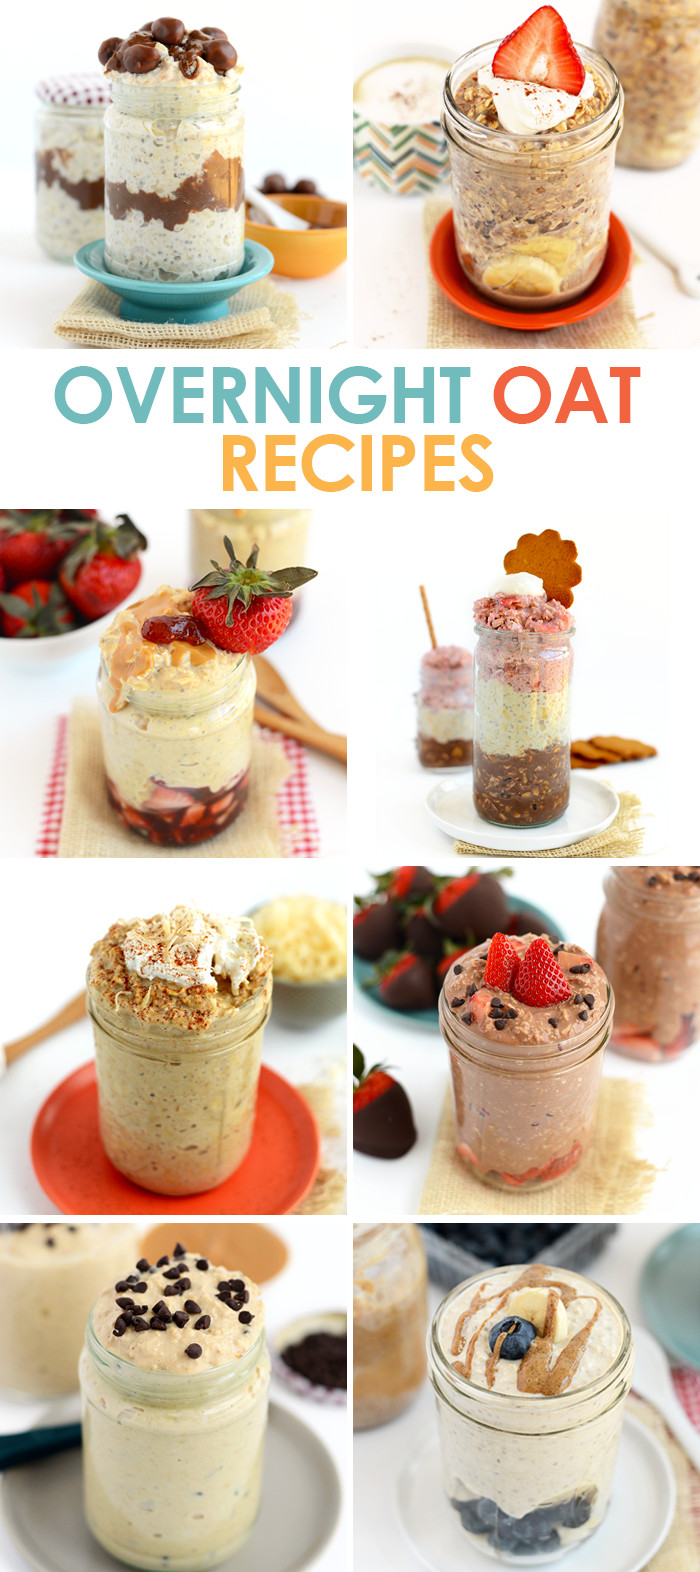 Overnight Oats Recipe Healthy
 8 Ways to Eat Overnight Oats Fit Foo Finds